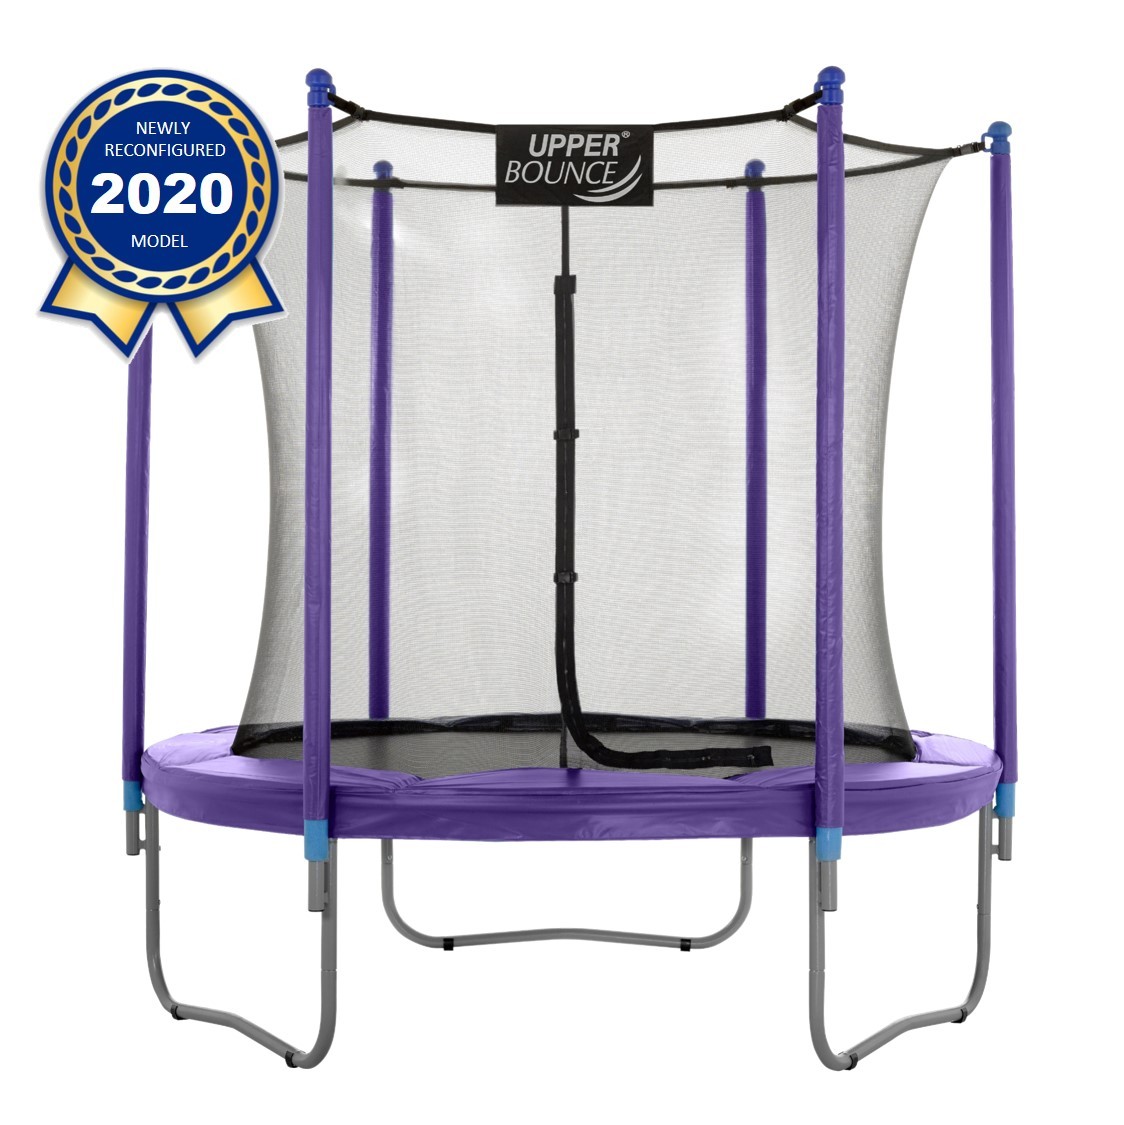 9Ft Large Trampoline and Enclosure Set | Garden & Outdoor Trampoline with Safety Net, Mat, Pad | Purple